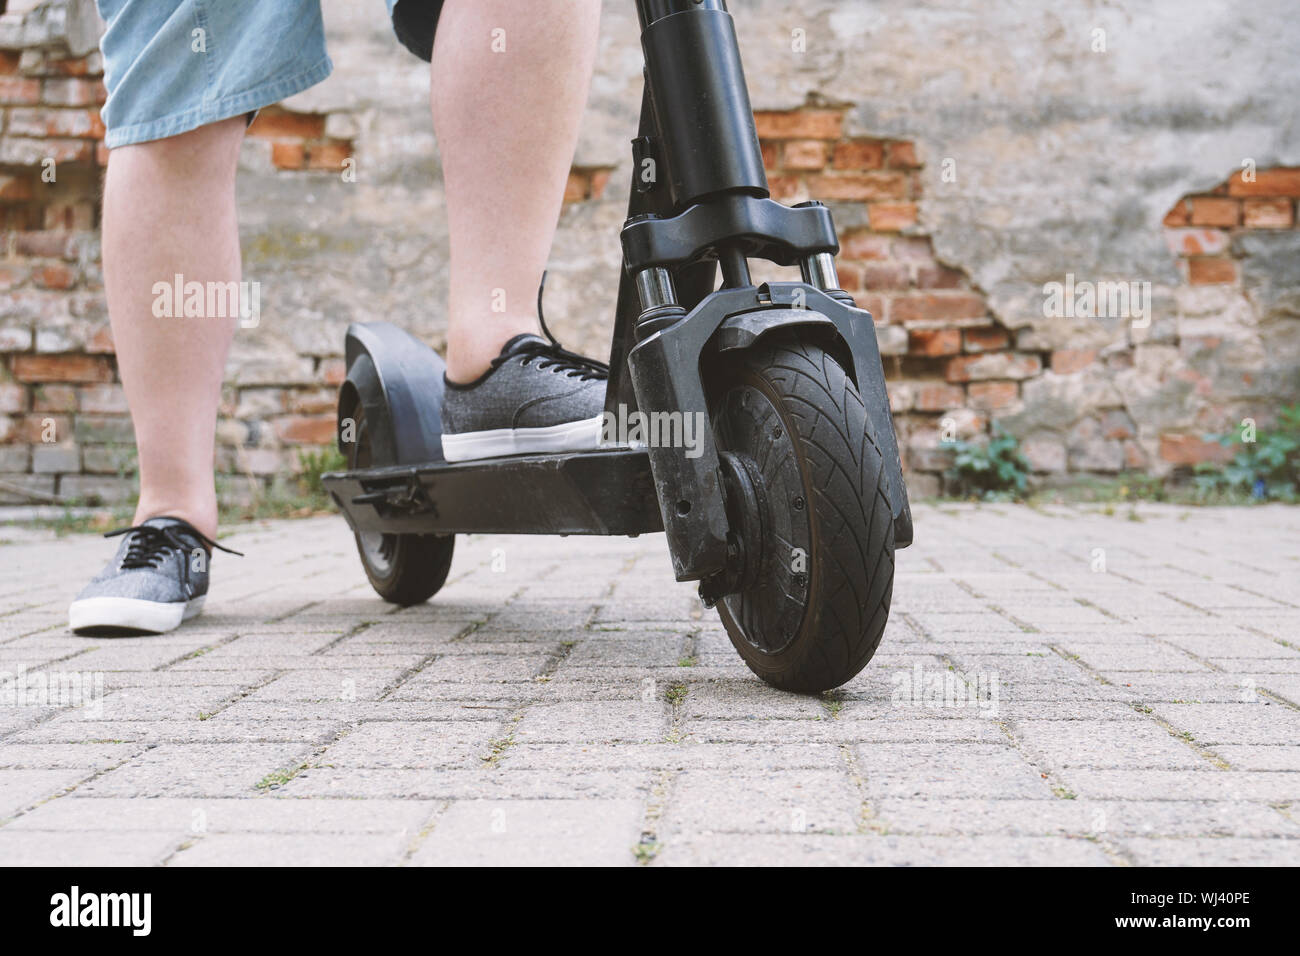 legs of unrecognizable man wearing shorts with electric kick scooter or e-scooter - e-mobility or micro-mobility hipster lifestyle trend Stock Photo